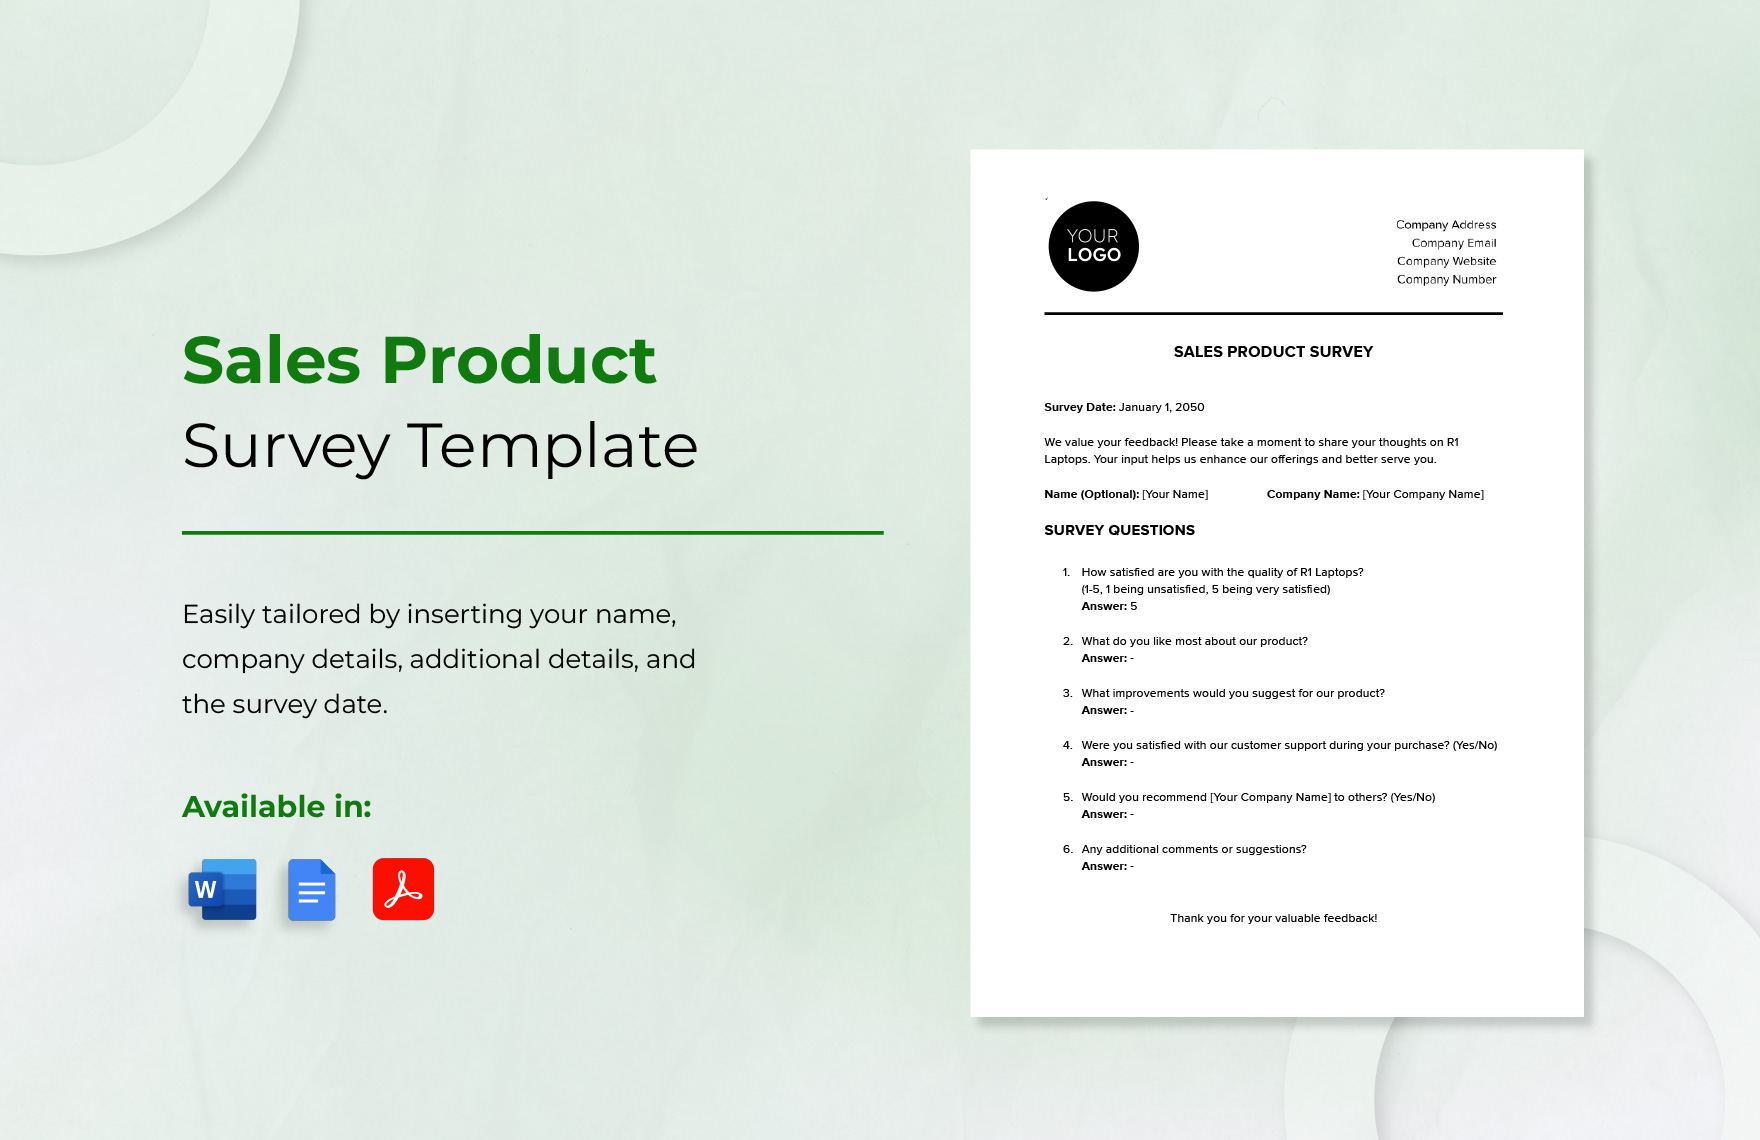 Sales Product Survey Template in Word, Google Docs, PDF